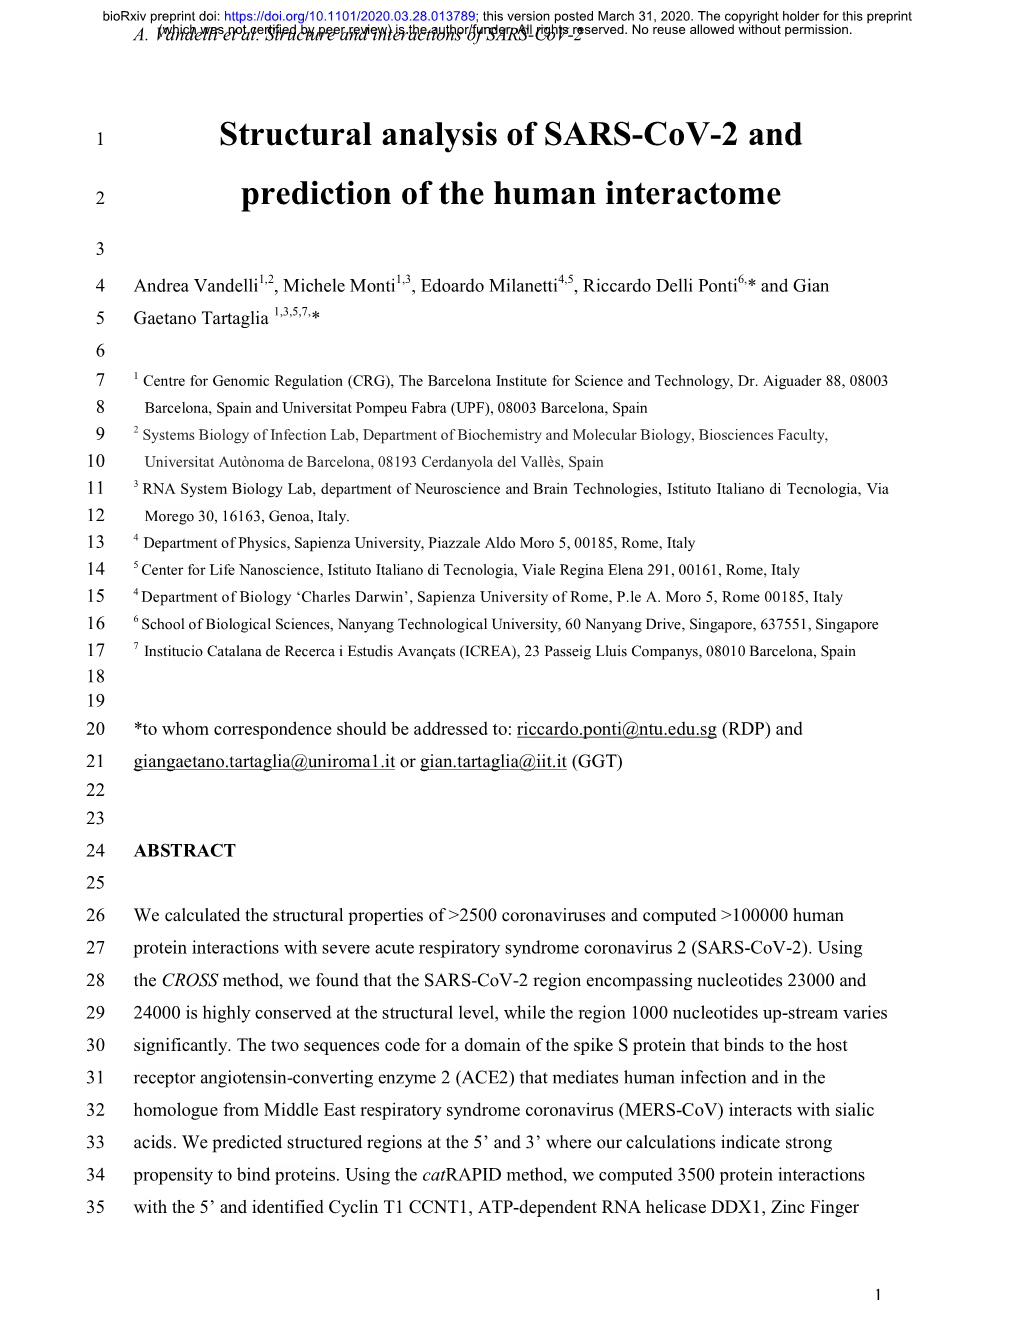 Structural Analysis of SARS-Cov-2 and Prediction of the Human